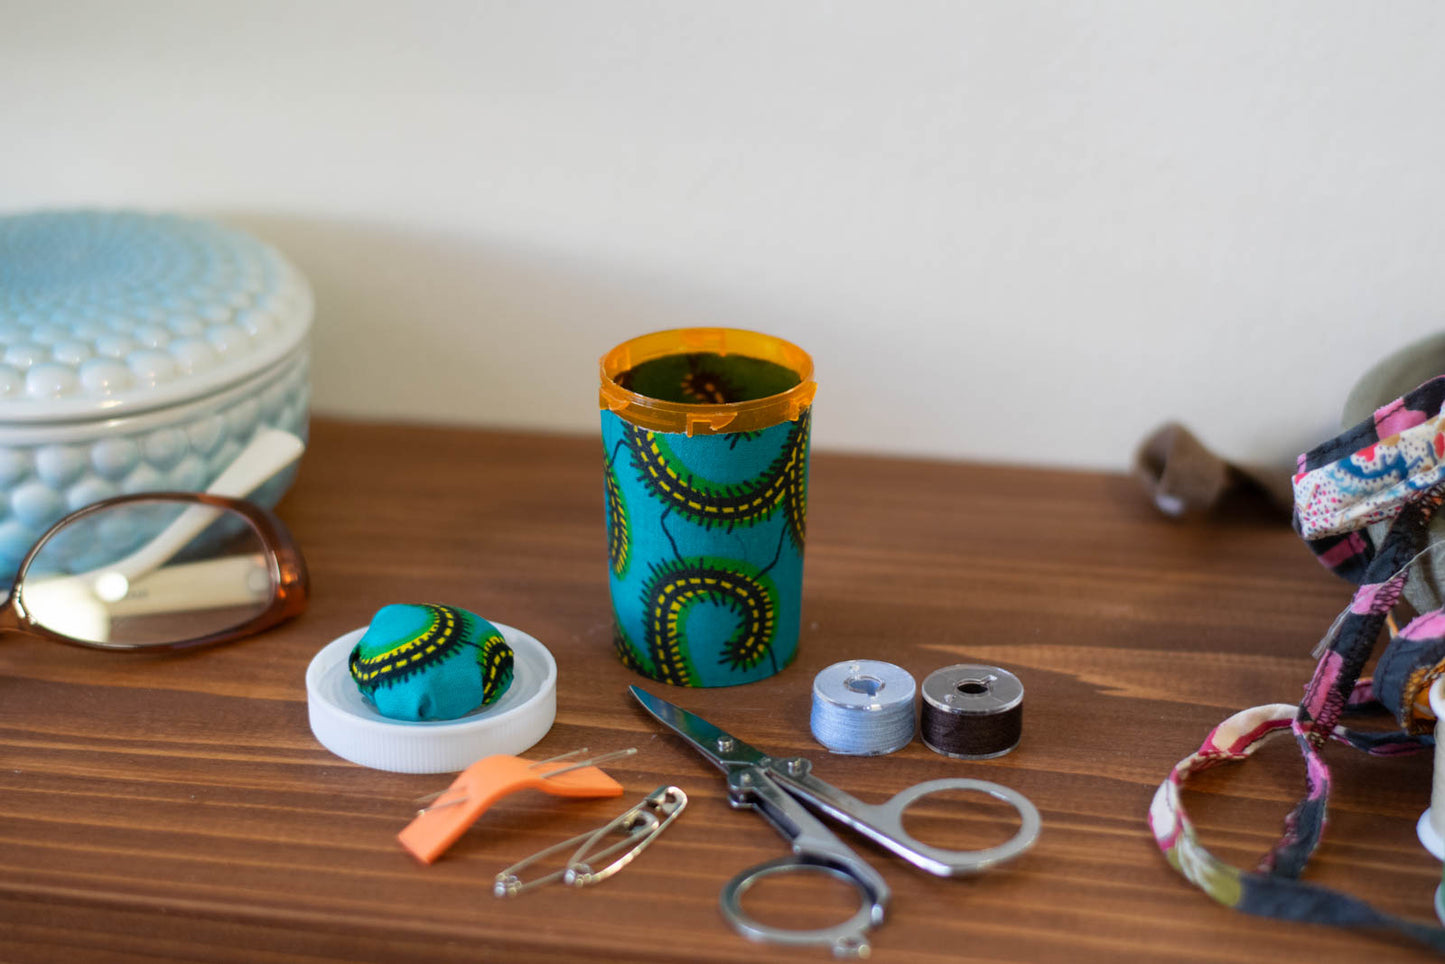 Upcycled Prescription Bottle Sewing Kit — Teal African Wax Print, 2.75" high, open with contents